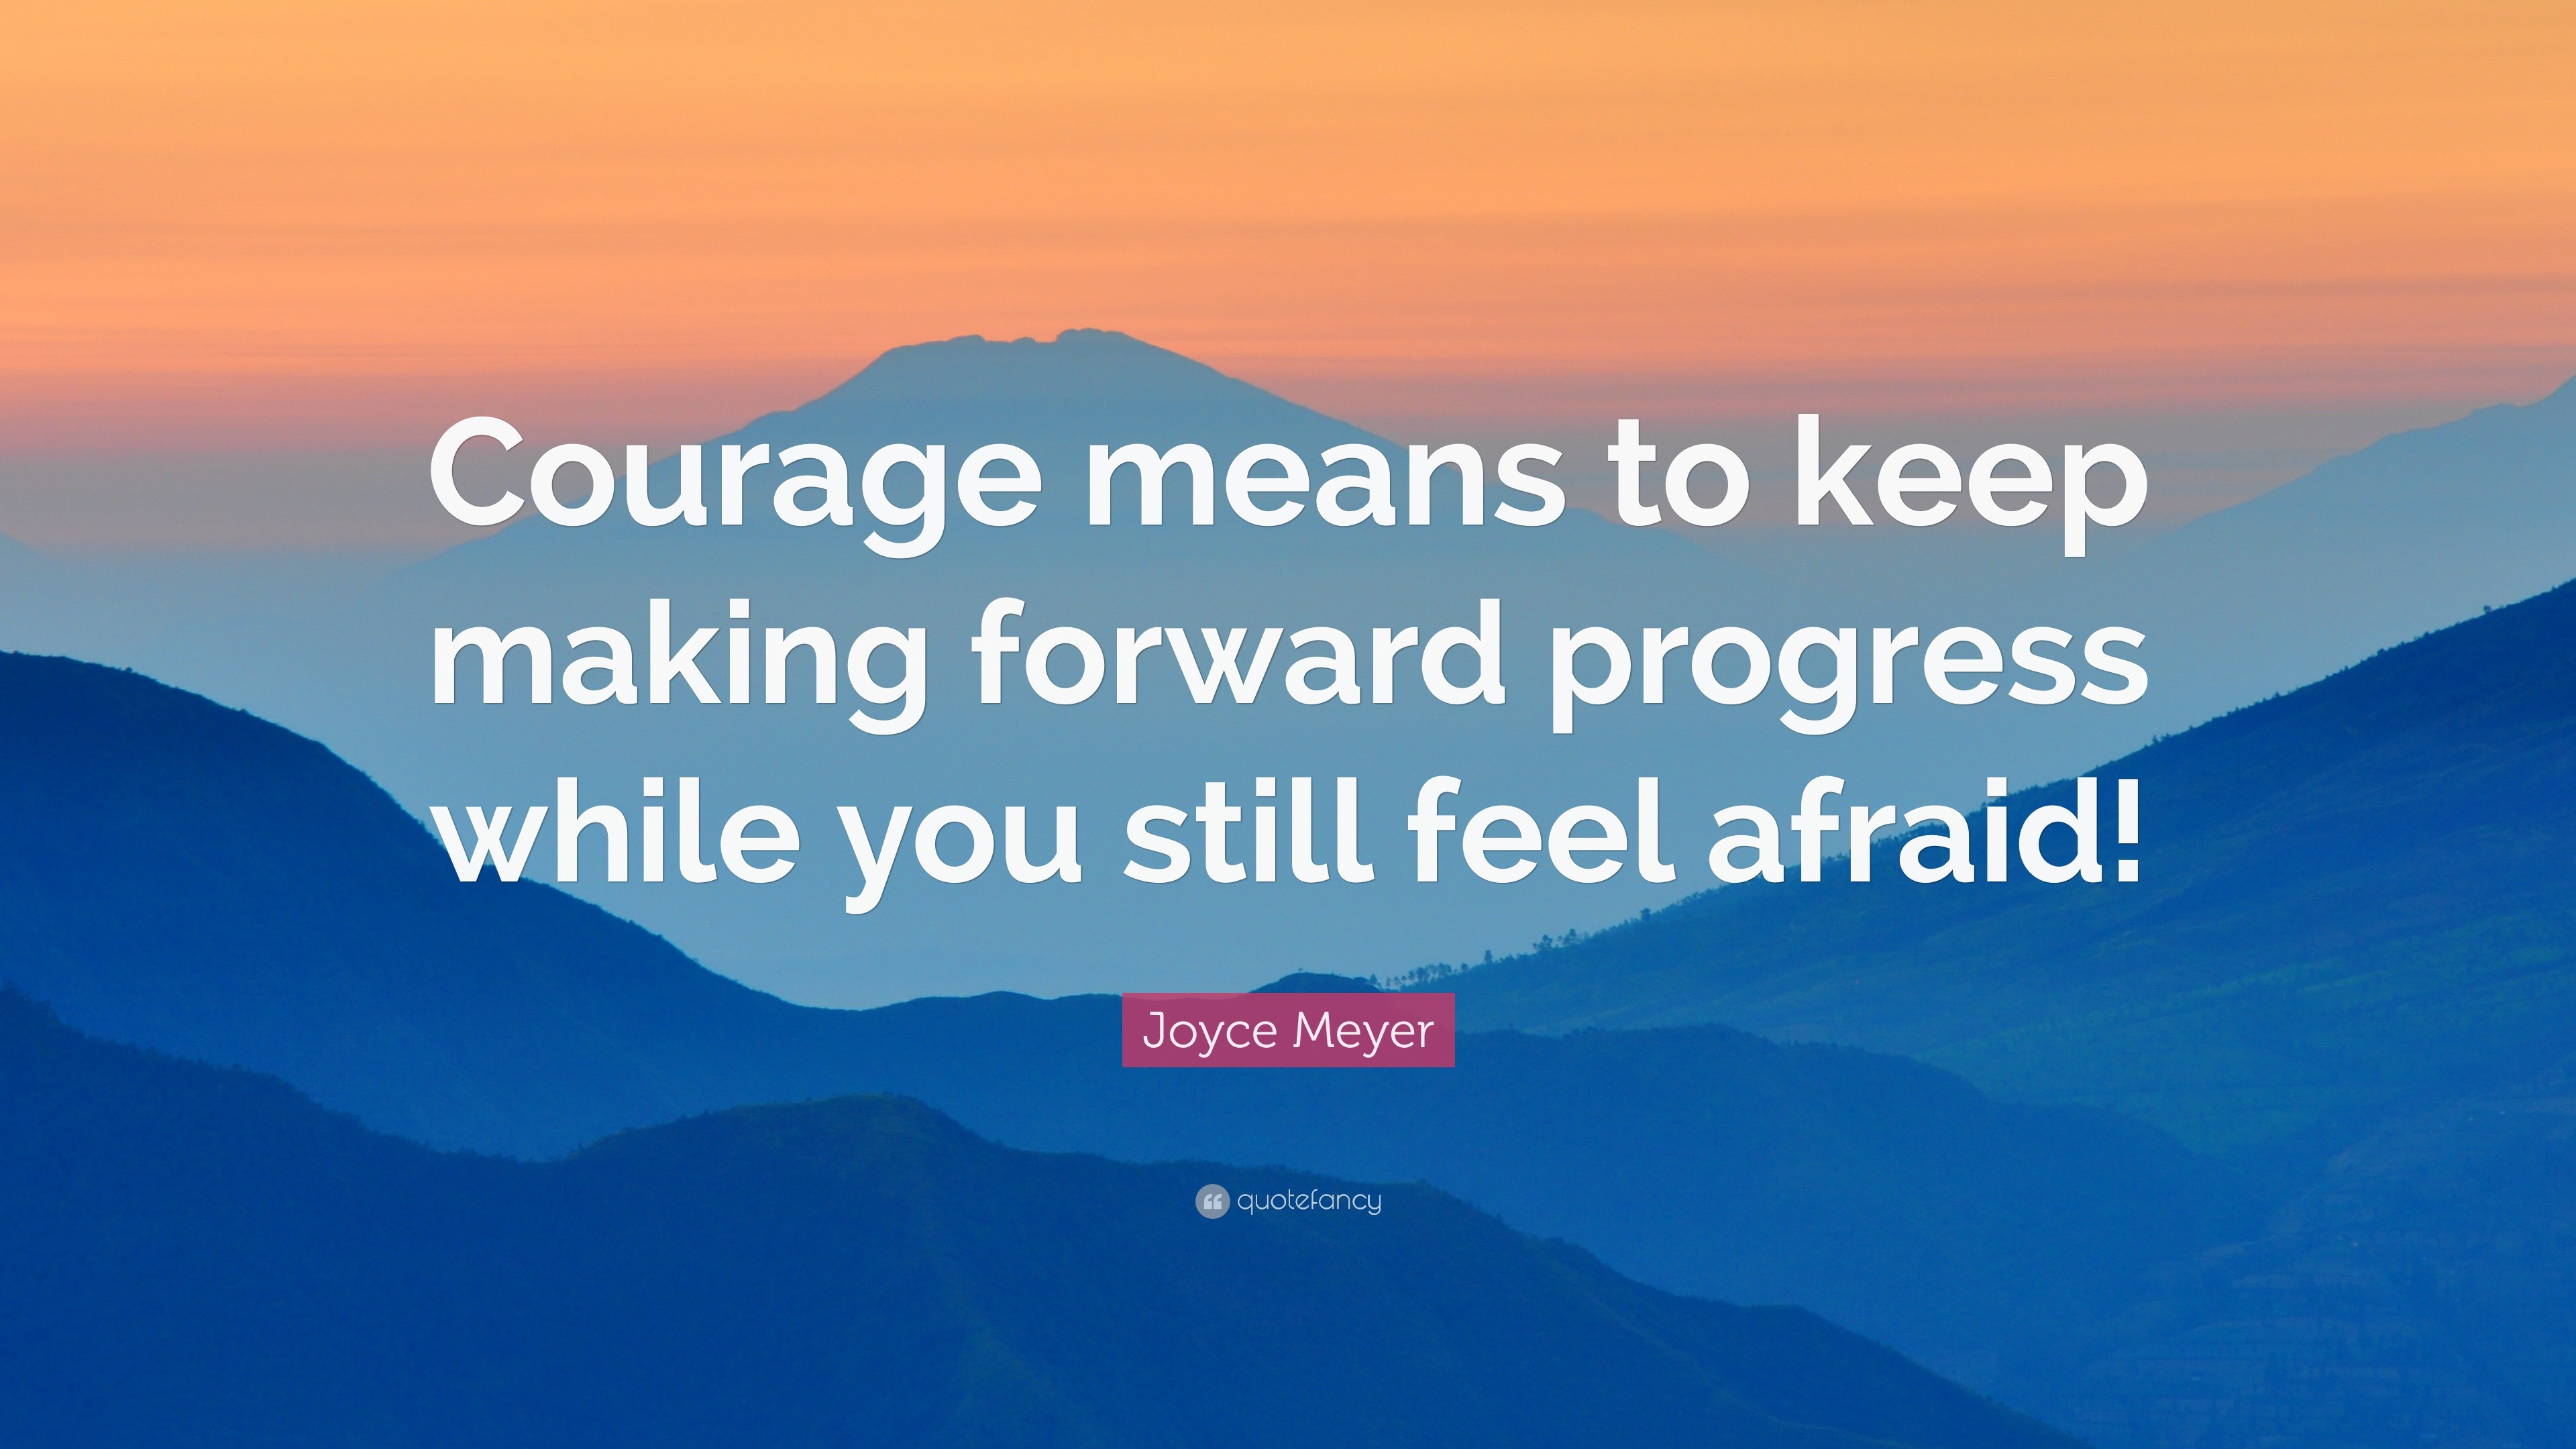 Joyce Meyer Quote: “Courage means to keep making forward progress while ...